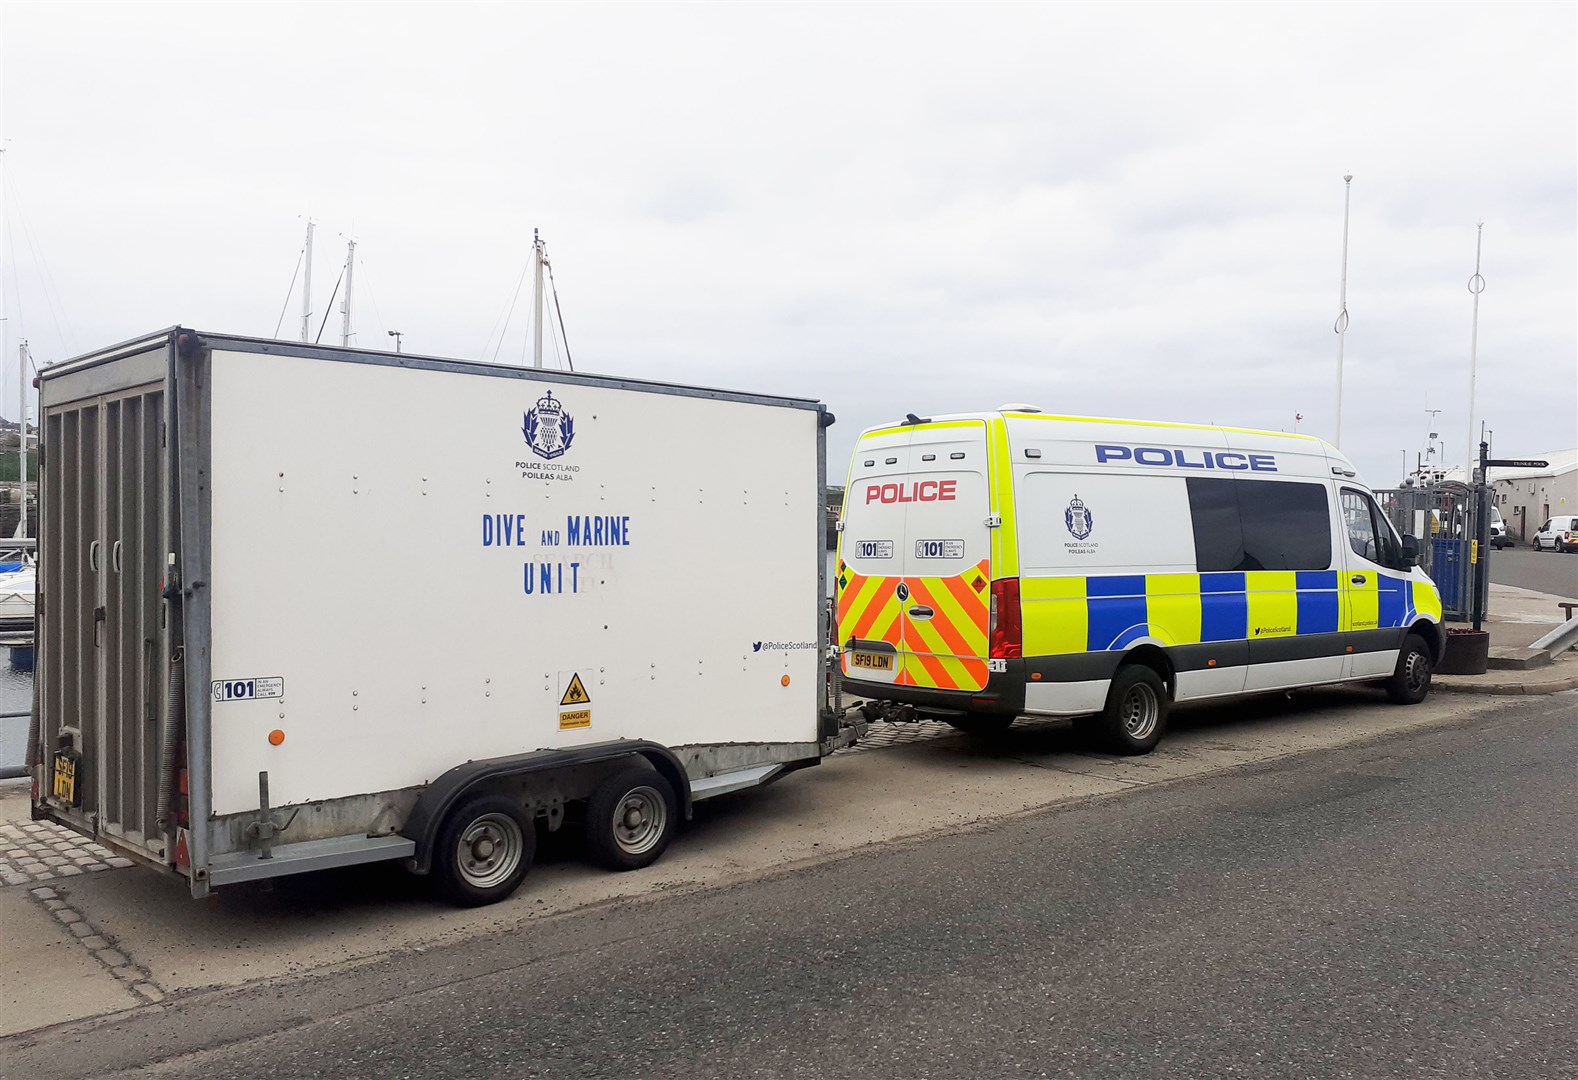 Police Scotland's Dive and Marine Unit trailer at Wick harbour this morning.